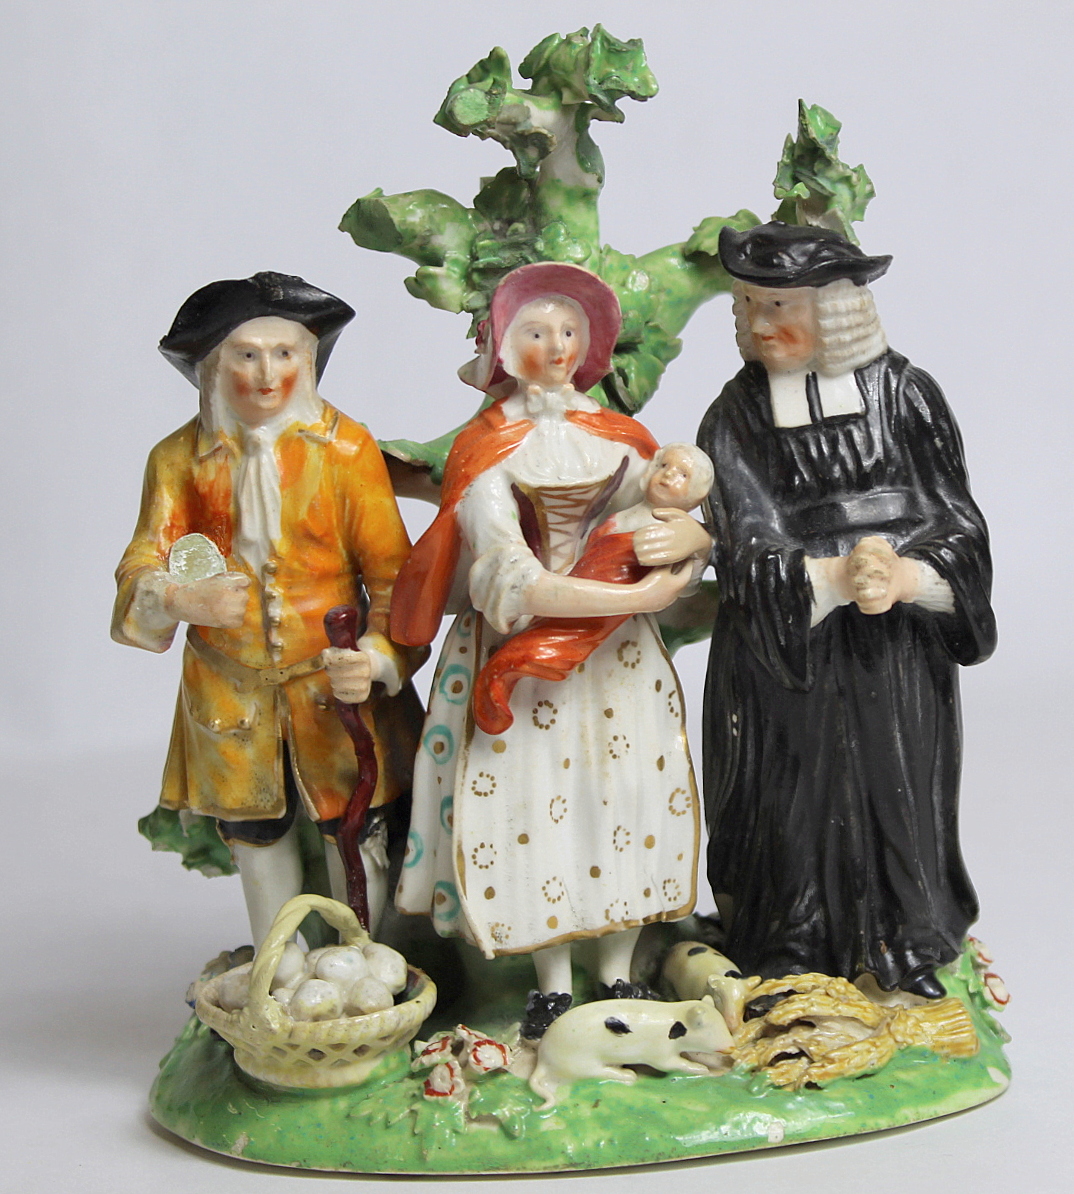 Early 19th century Derby Tythe Pig group with farmer, wife and parson standing on naturalistic